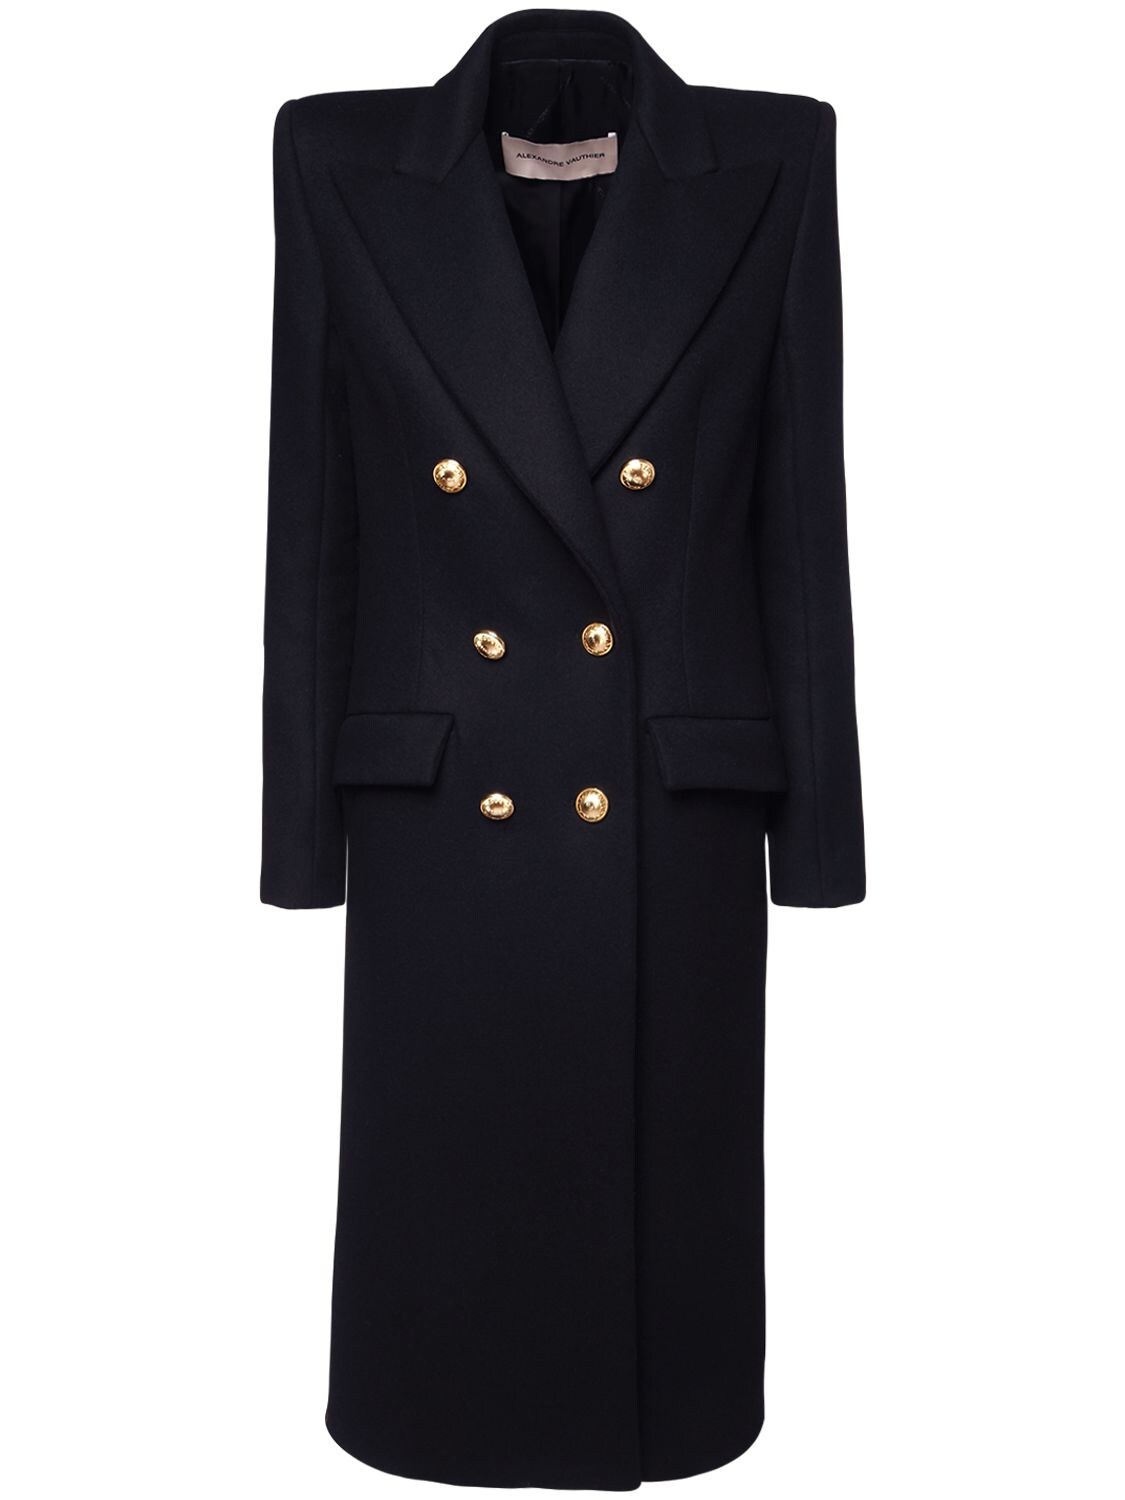 ALEXANDRE VAUTHIER DOUBLE BREASTED MELTON WOOL LONG COAT,72I5BH005-QKXBQ0S1